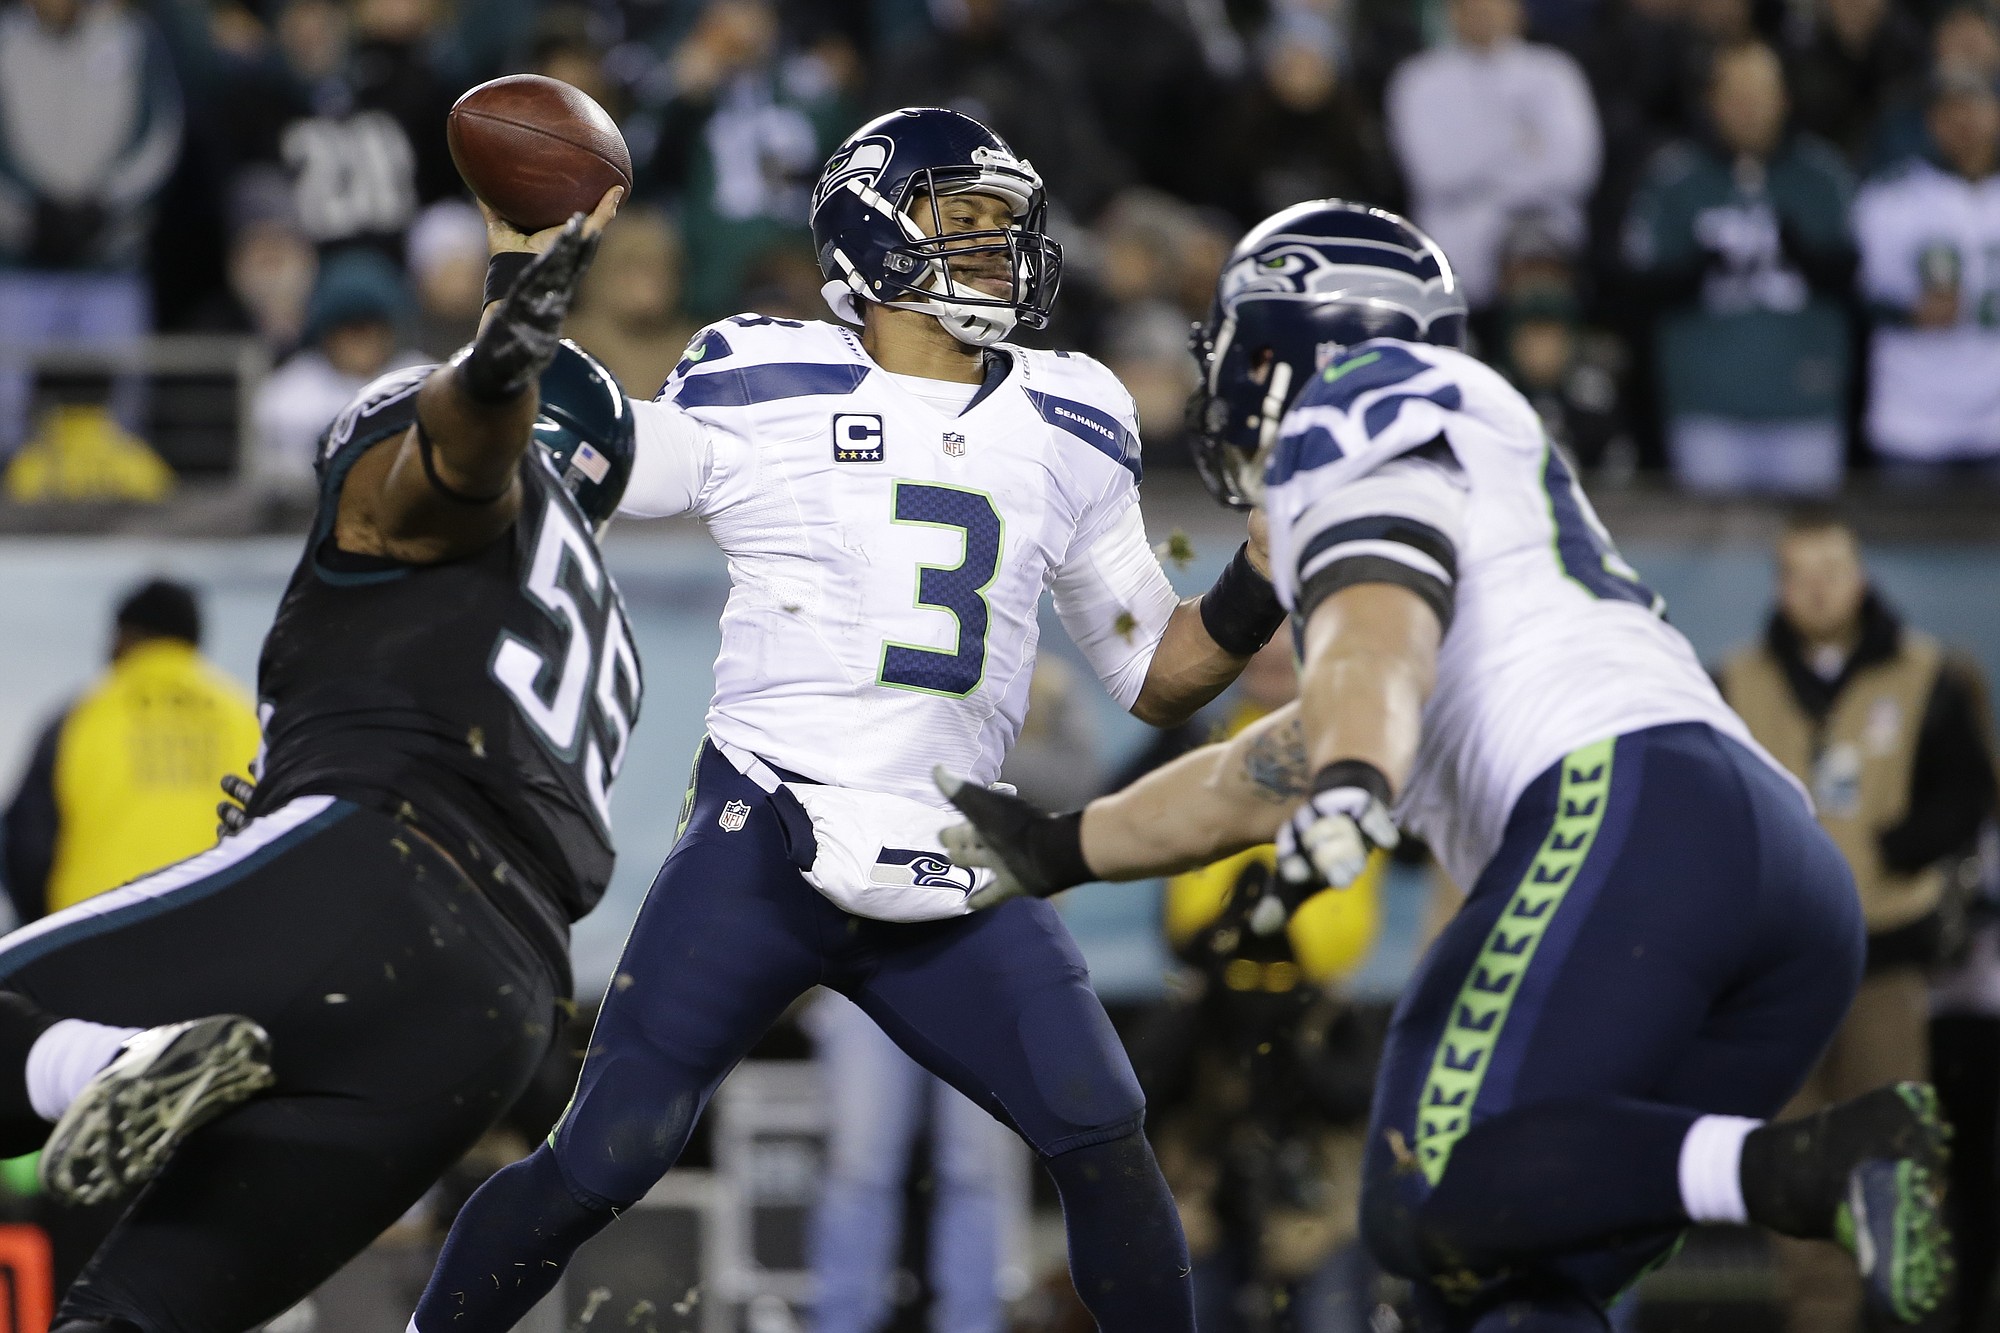 Seattle Seahawks' Russell Wilson passes during the second half against the Philadelphia Eagles, on Sunday, Dec. 7, 2014, in Philadelphia. Wilson had 263 passing yards and two TD passes in the 24-14 Seahawks' victory.